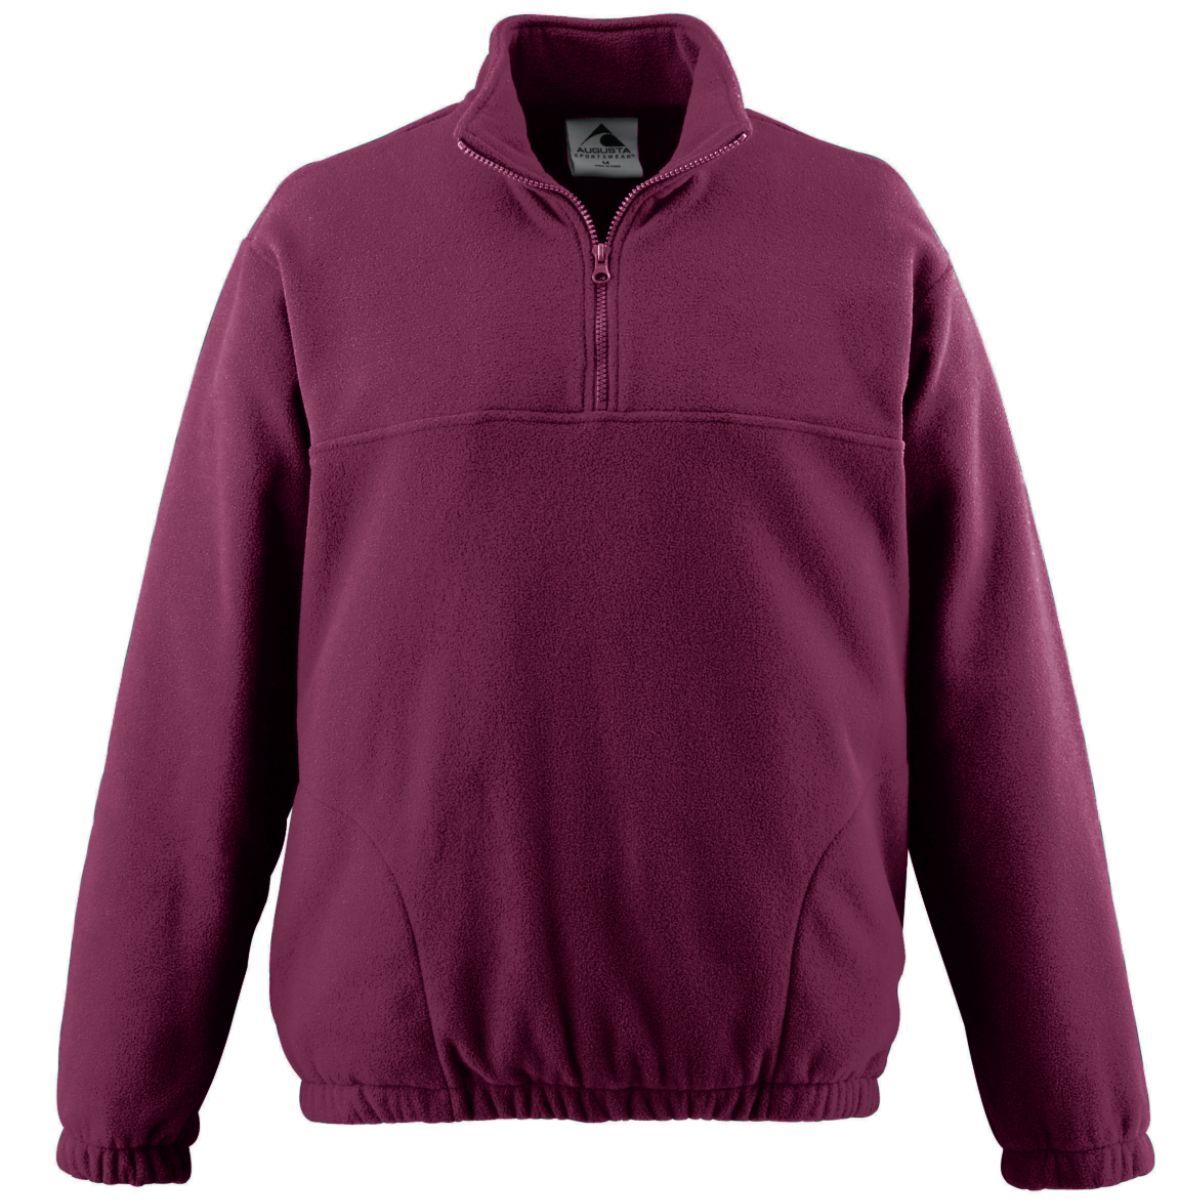 Augusta Sportswear Chill Fleece Half-Zip Pullover in Maroon  -Part of the Adult, Adult-Pullover, Augusta-Products, Outerwear product lines at KanaleyCreations.com